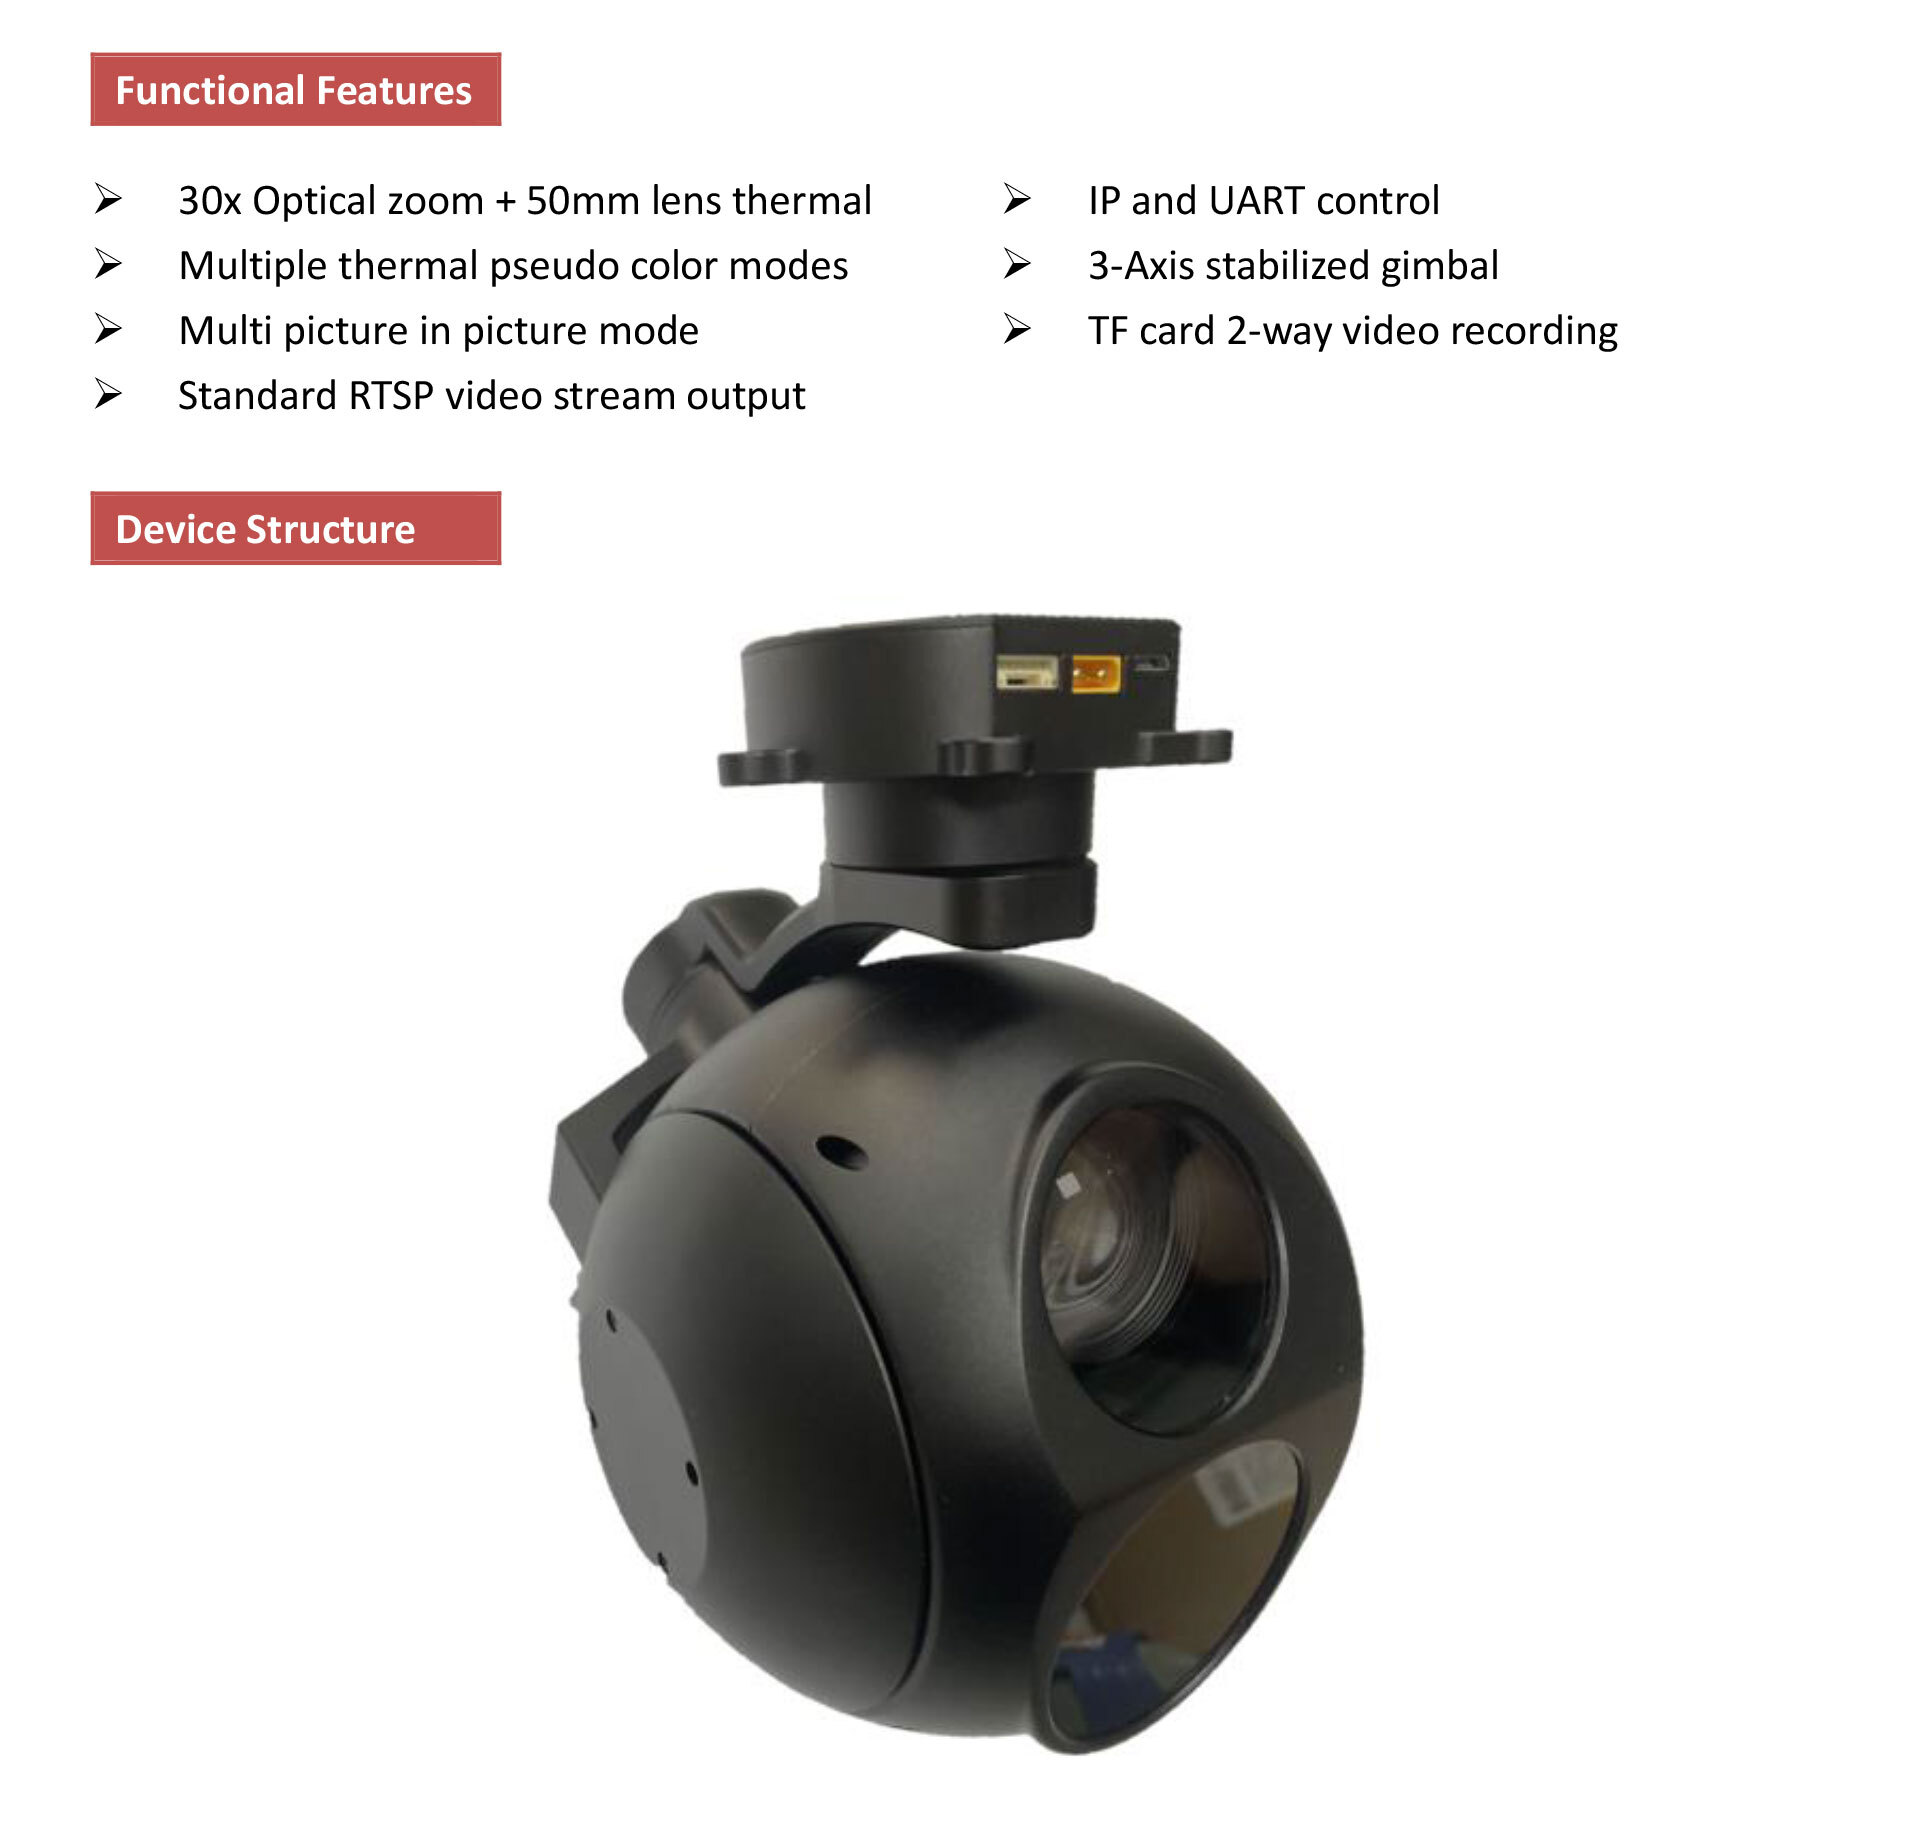 KIP30G650 30x optical zoom + 50mm lens 640*512 thermal imaging camera with 3-axis gimbal, Ethernet/IP output